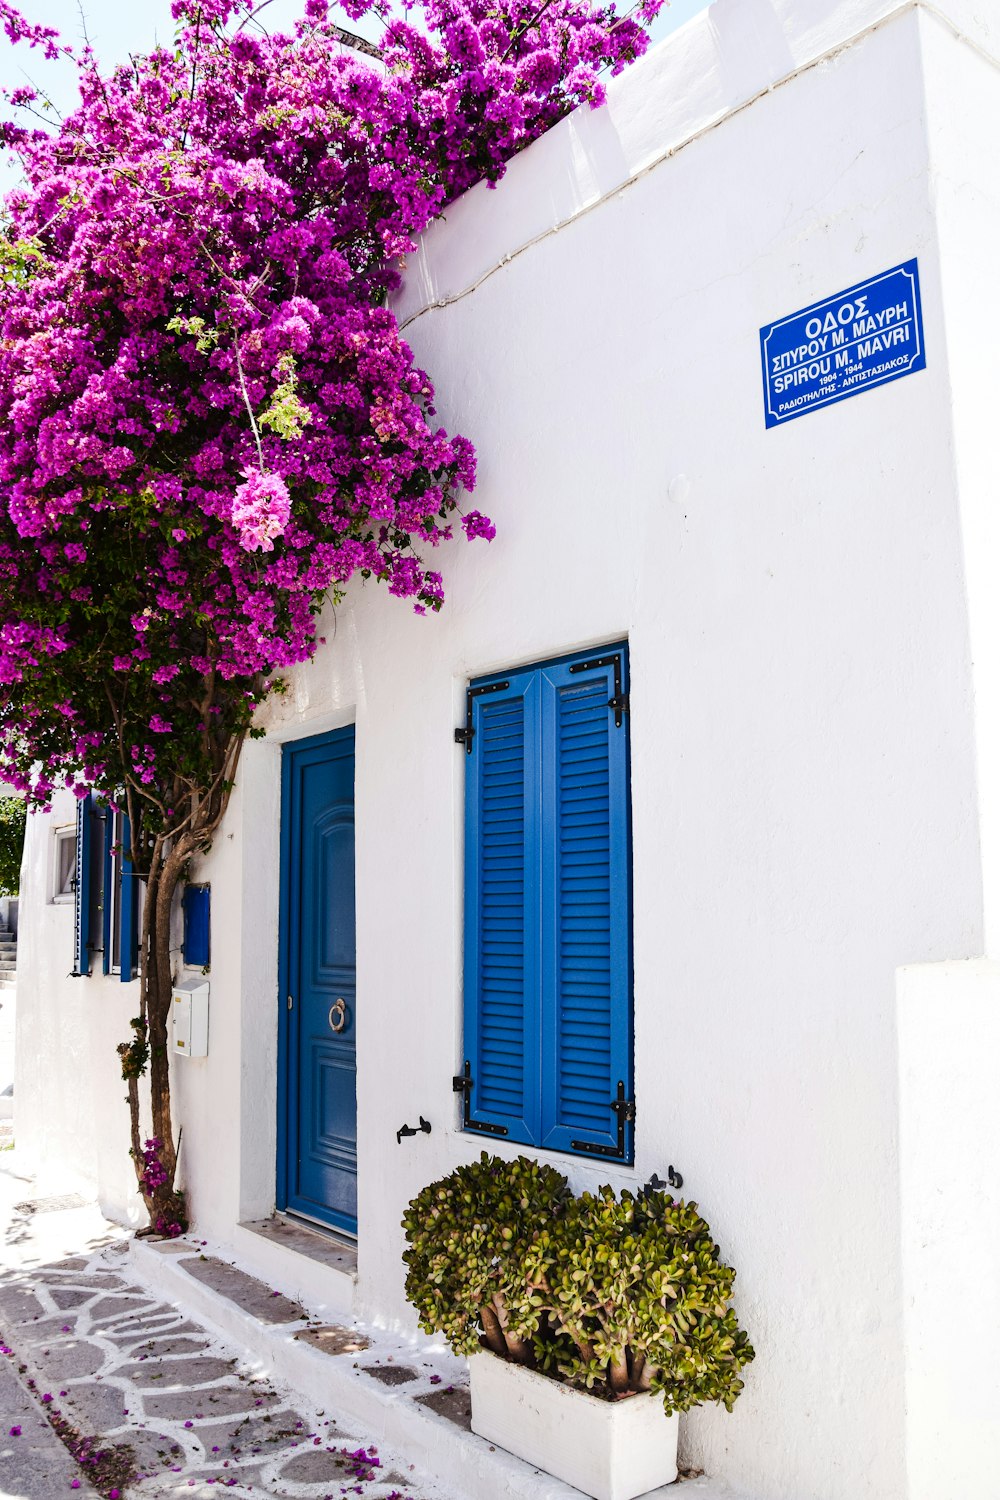 a white building with a blue door and a tree with purple flowers